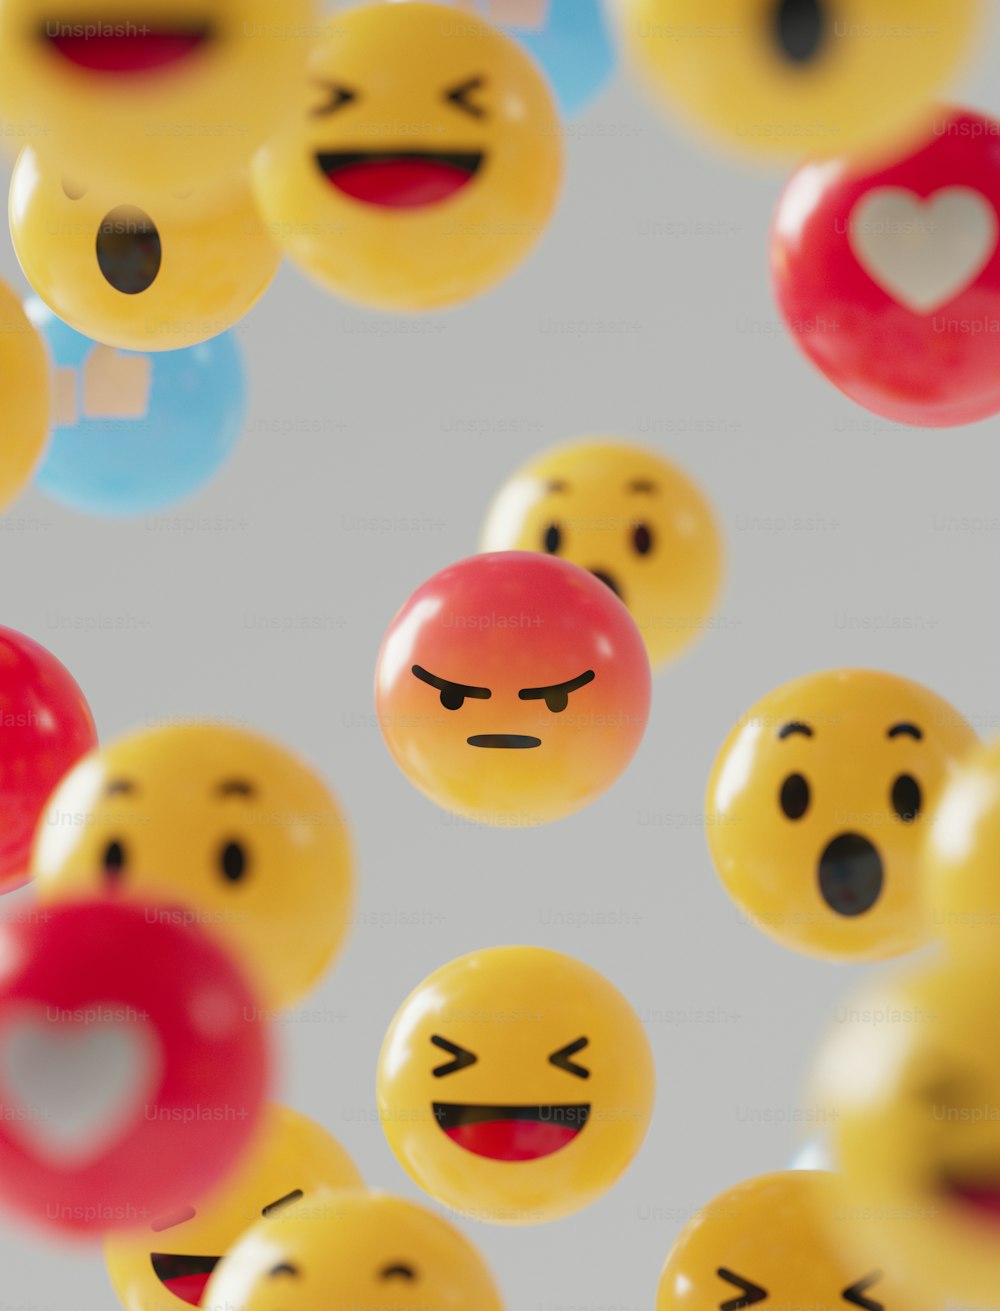 Download Emoticon Smiley Yellow Royalty-Free Stock Illustration